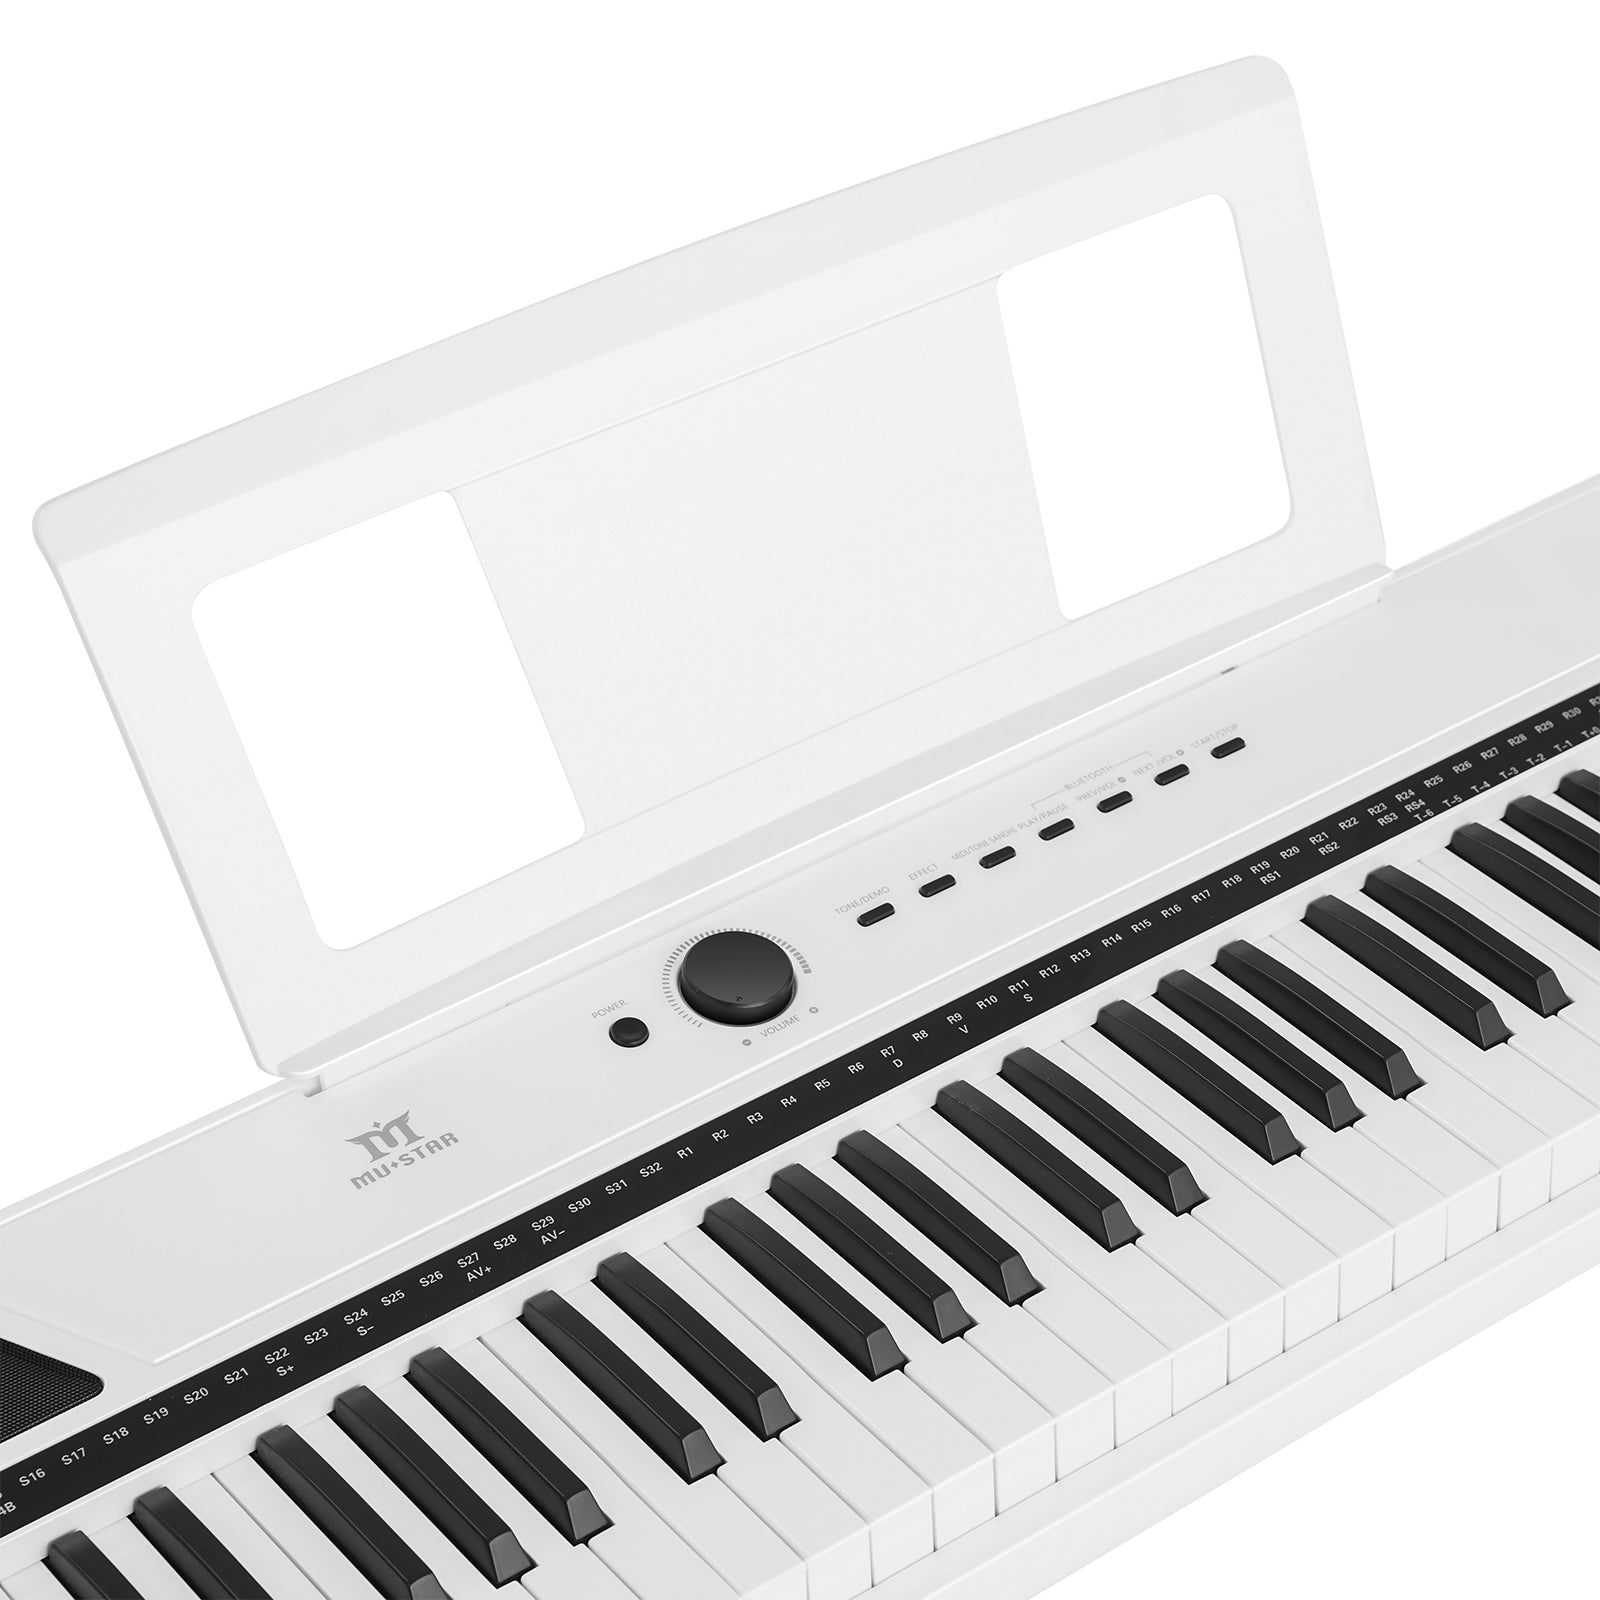 MUSTAR MEP-1400, 88 keys Digital Piano, Semi Weighted Keyboard Piano, Electronic Keyboards for Beginners, Sustain Pedal, USB/MIDI/Bluetooth, ABS, 128 Rhythms, 2 built-in 25W Stereo Speakers, White